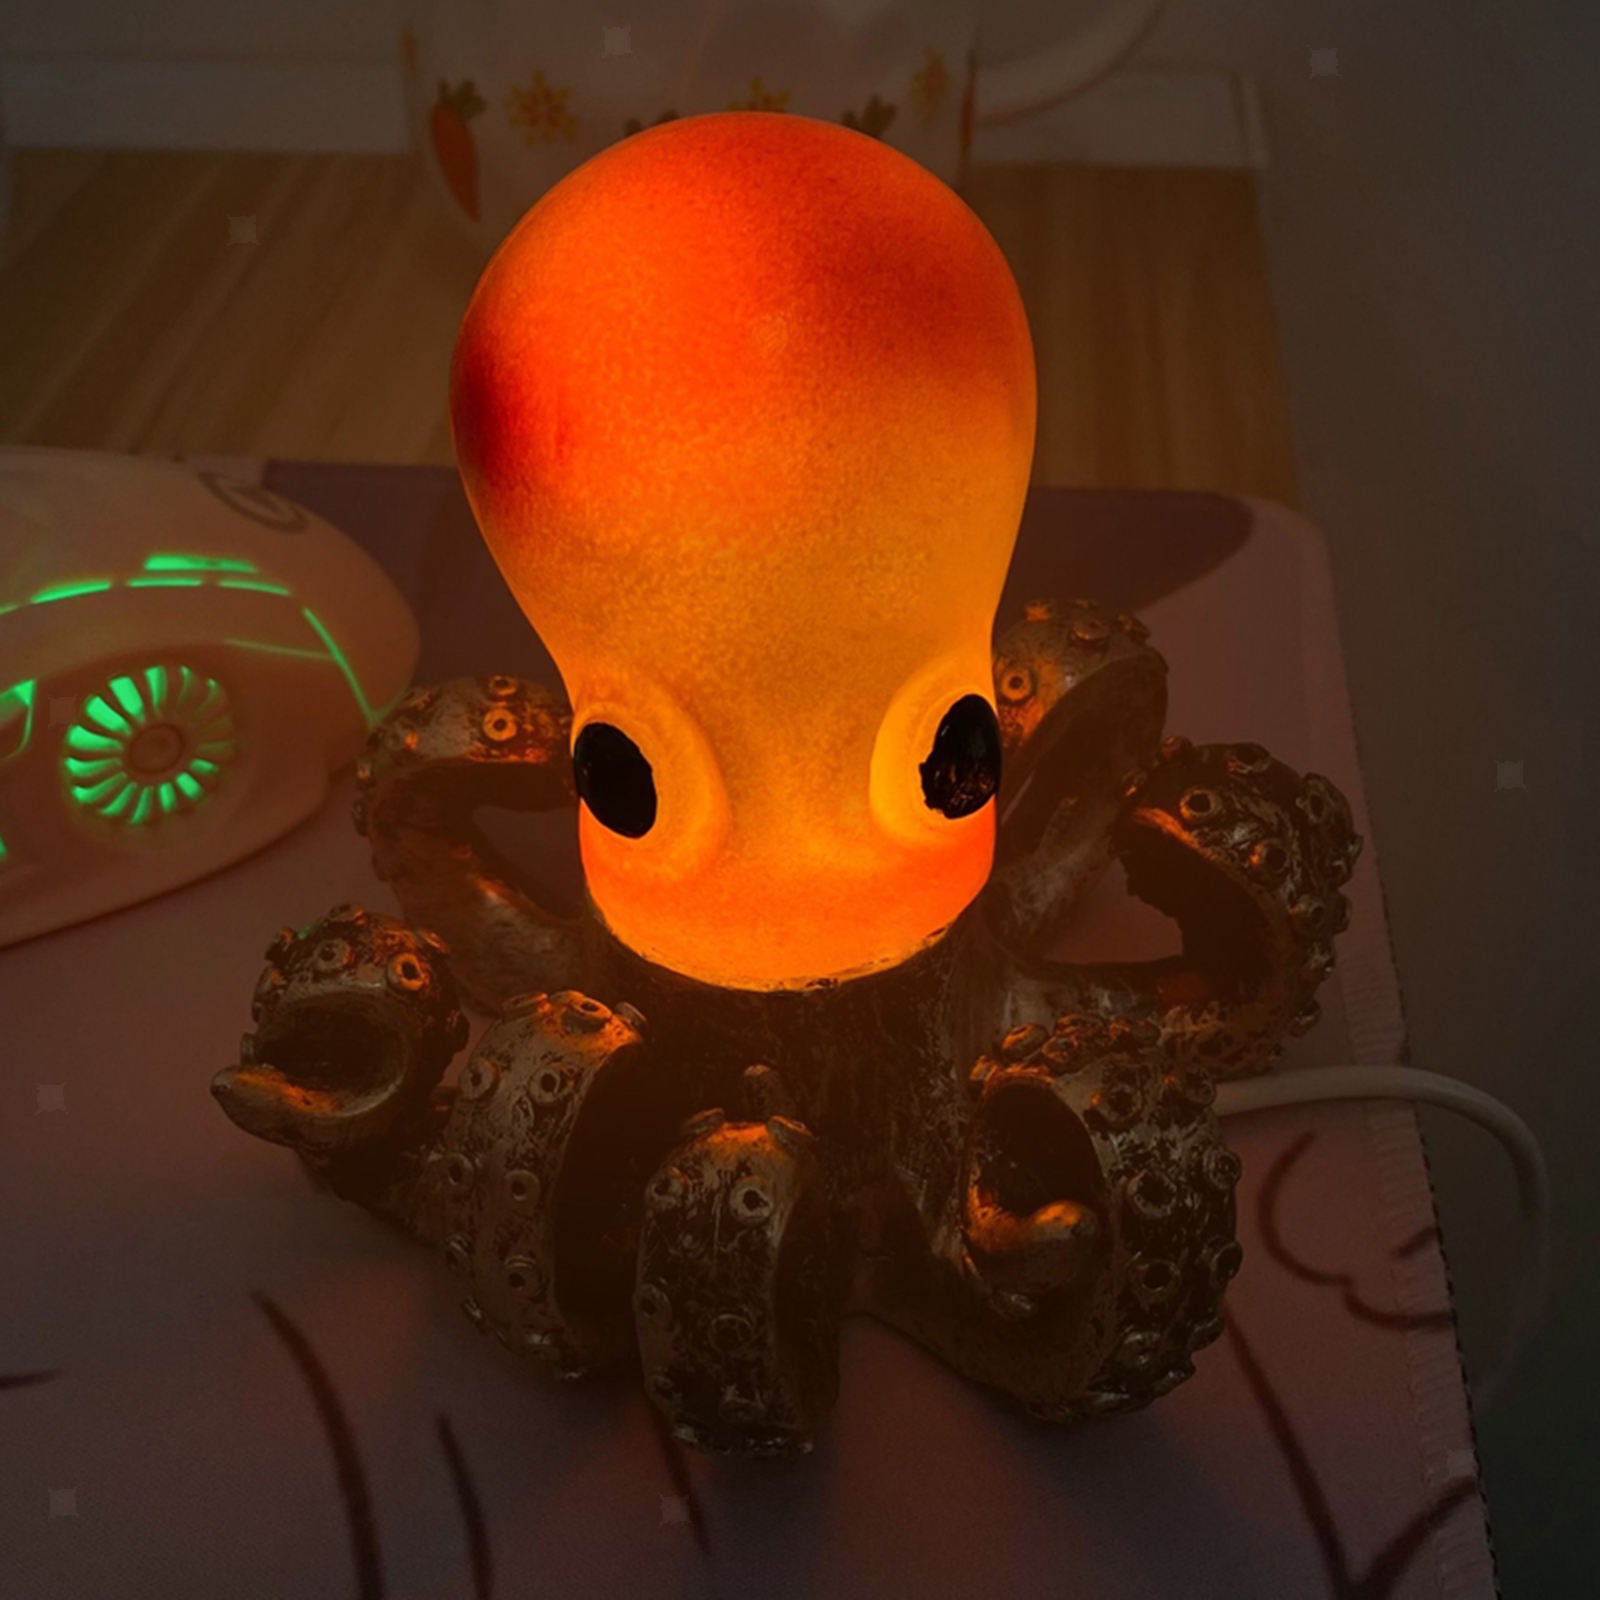 Octopus Decorative Living Room Bedside Octopus Table Lamp,Desk Lamp with USB